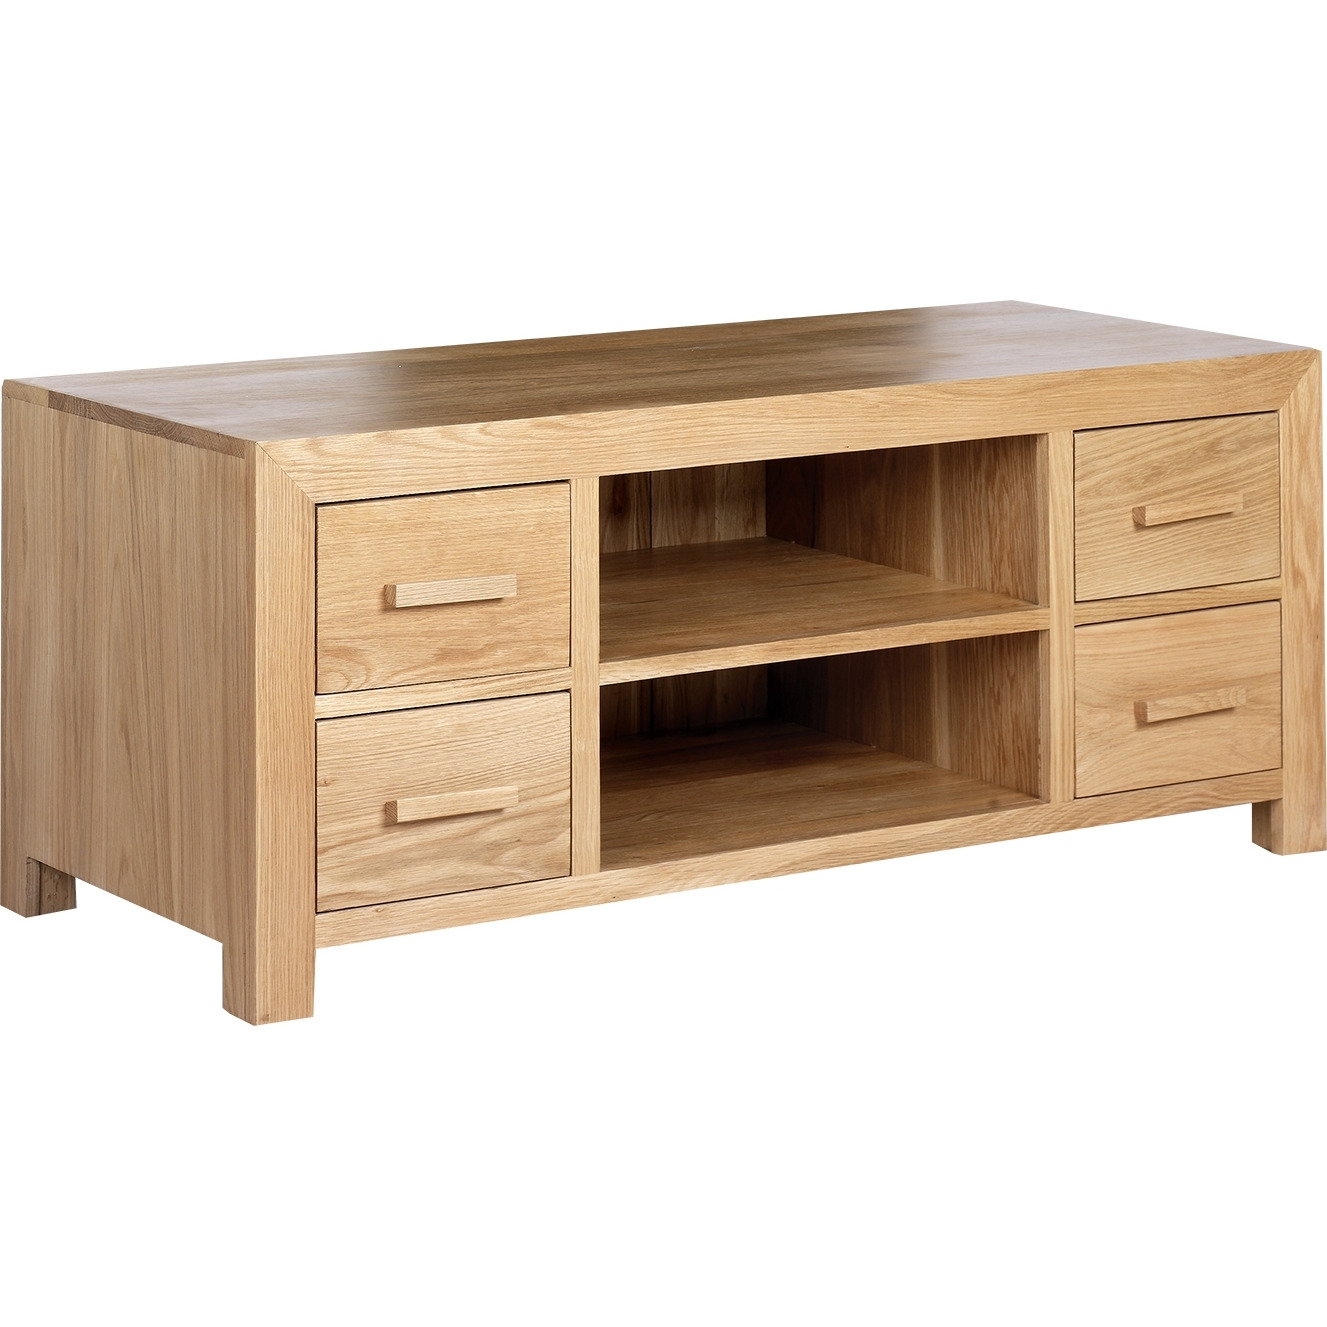 Cube Light Oak TV Unit, 125cm W with Storage for Television Upto 43in Plasma - image 1